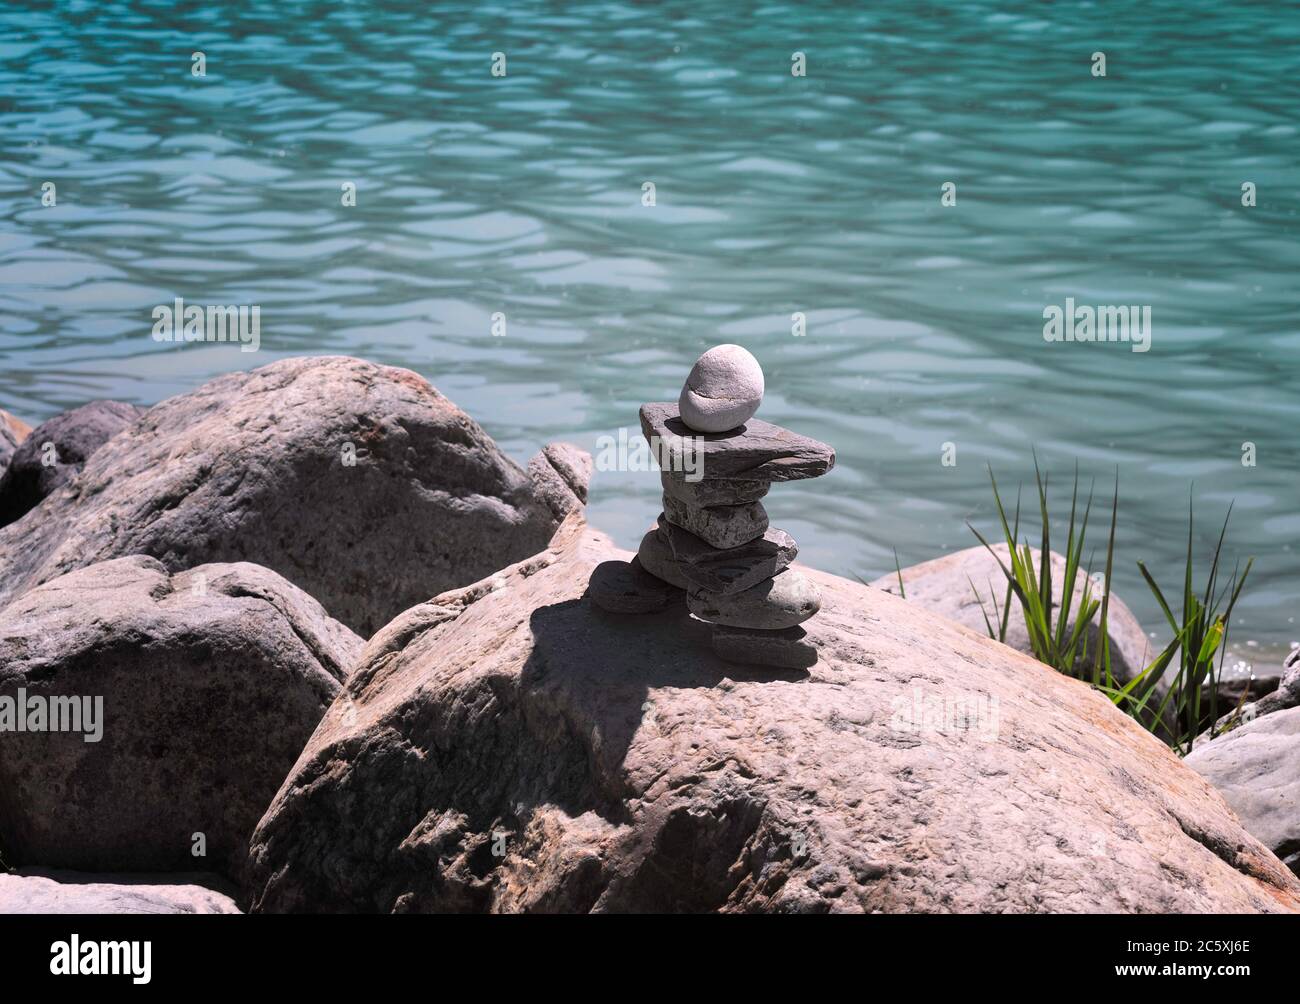 Inukshuk, piled stone structure over rocks with lake view behind. Relax Stock Photo